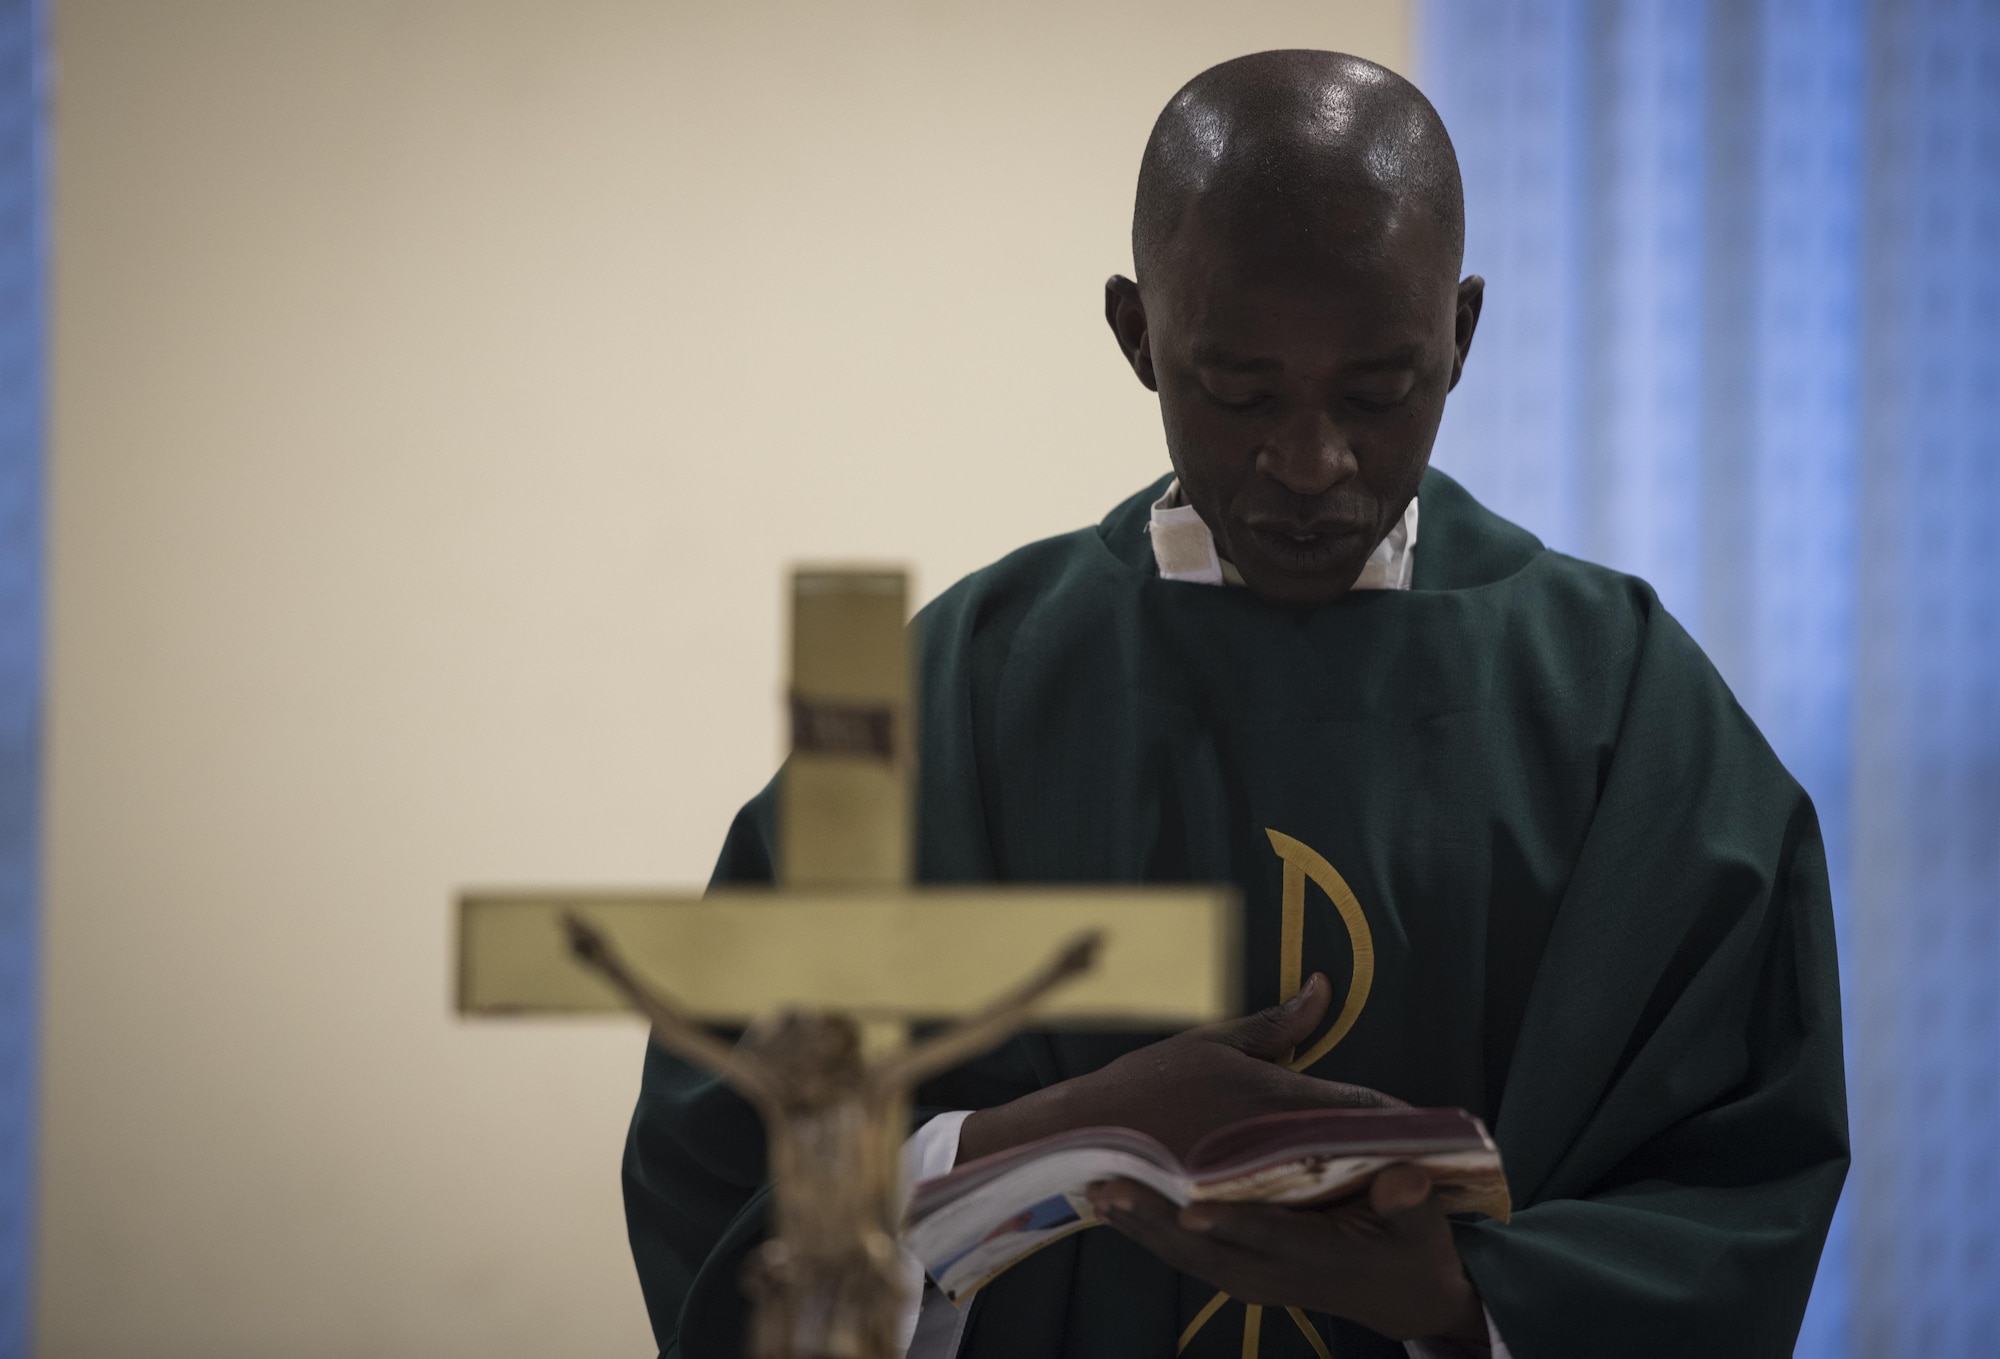 Chaplain (Capt.) John Appiah, 455th Air Expeditionary Wing, recites a passage during a religious service at Hamid Karzai International Airport, Kabul, Afghanistan, July 23, 2017. Religious support teams from Bagram Airfield visit six different locations in Afghanistan where a chaplain is not deployed. (U.S. Air Force photo by Staff Sgt. Benjamin Gonsier)